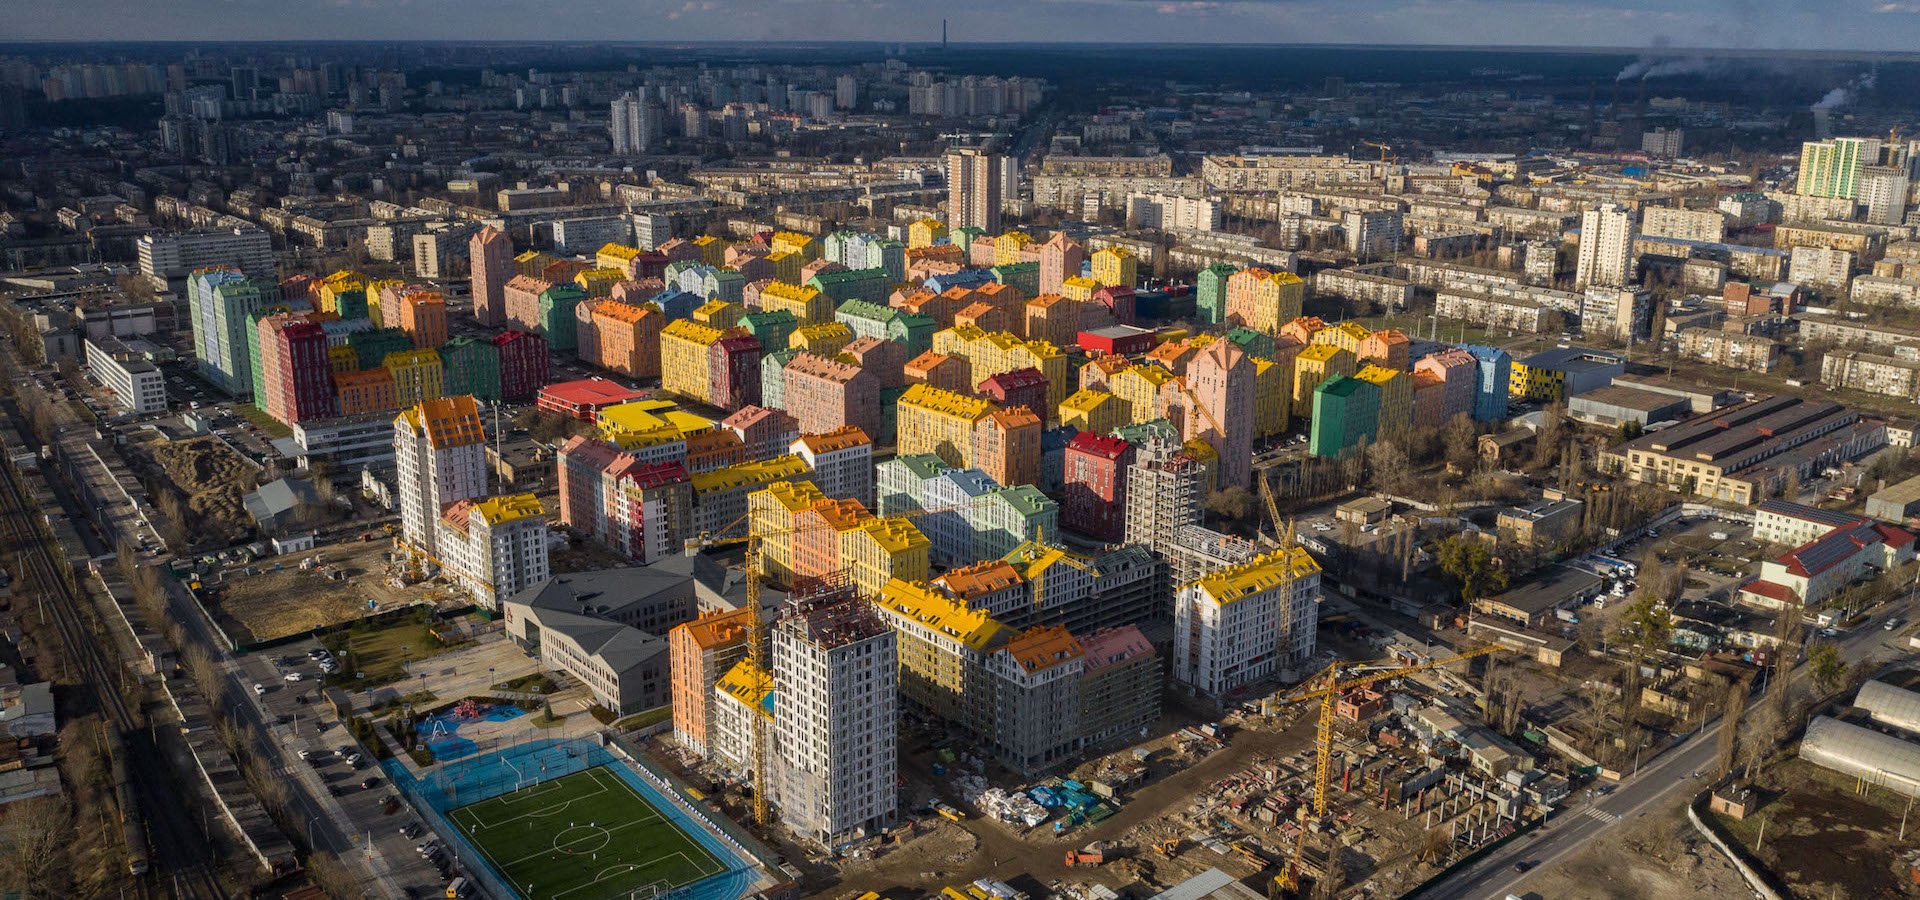 A nation’s tensions are laid bare in Kyiv’s colourful city-within-a-city. Welcome to Comfort Town